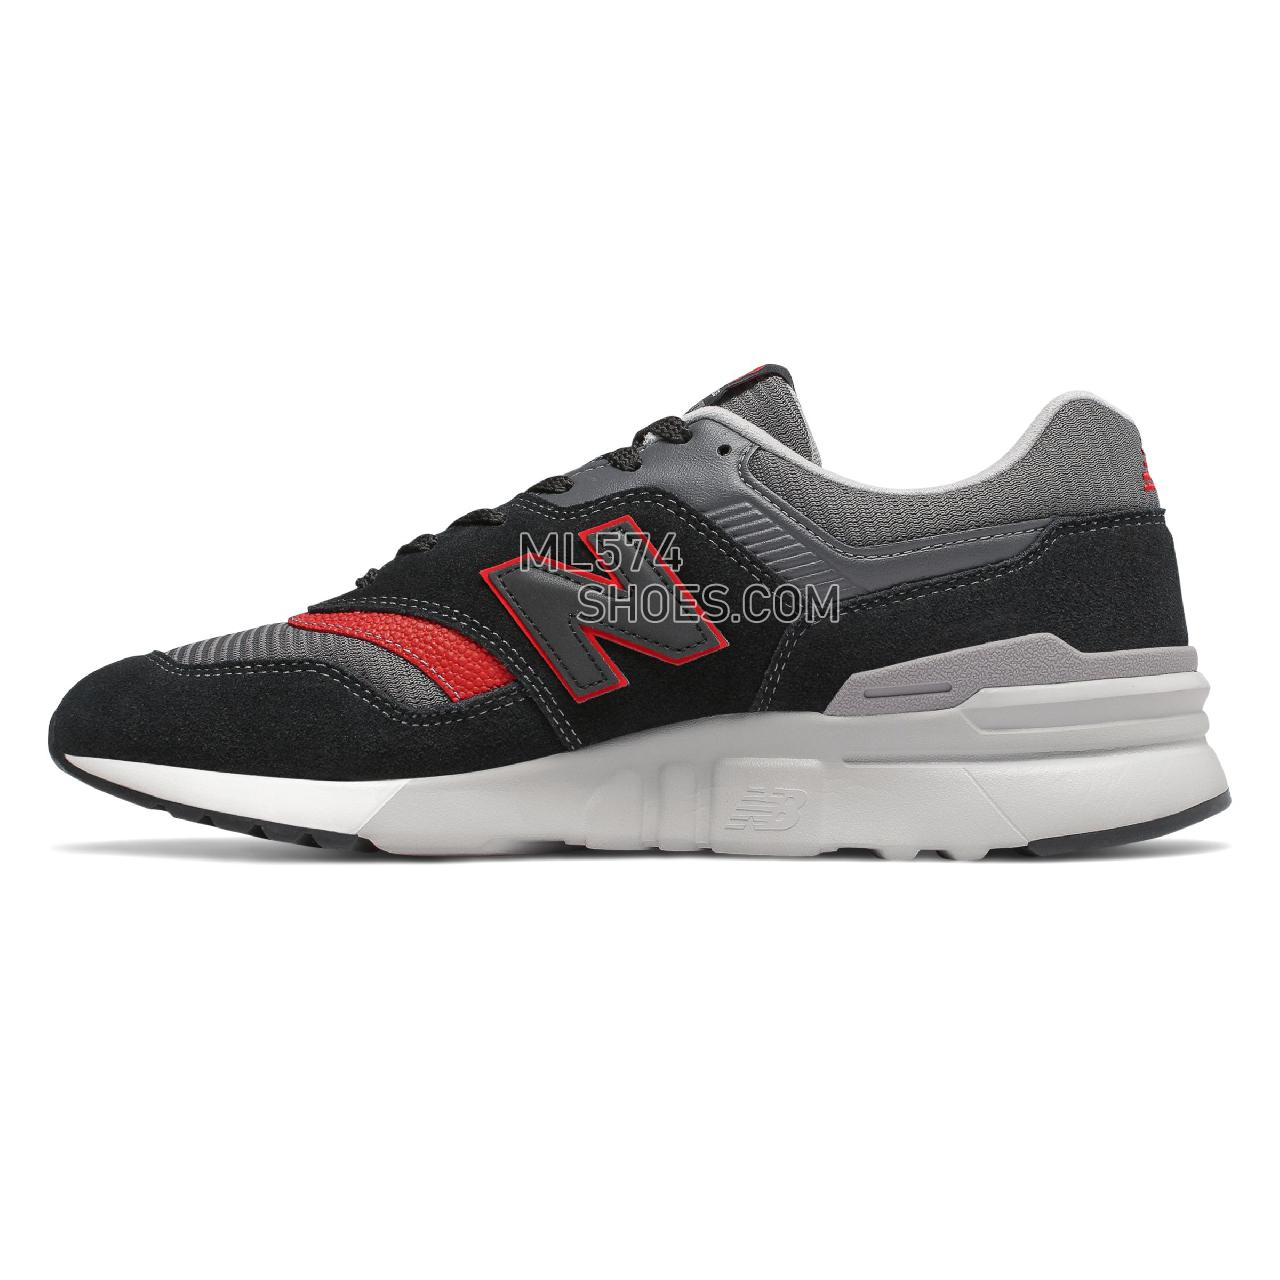 New Balance 997H - Men's 997H Classic CM997HV1-27438-M - Black with Grey and Red - CM997HXW